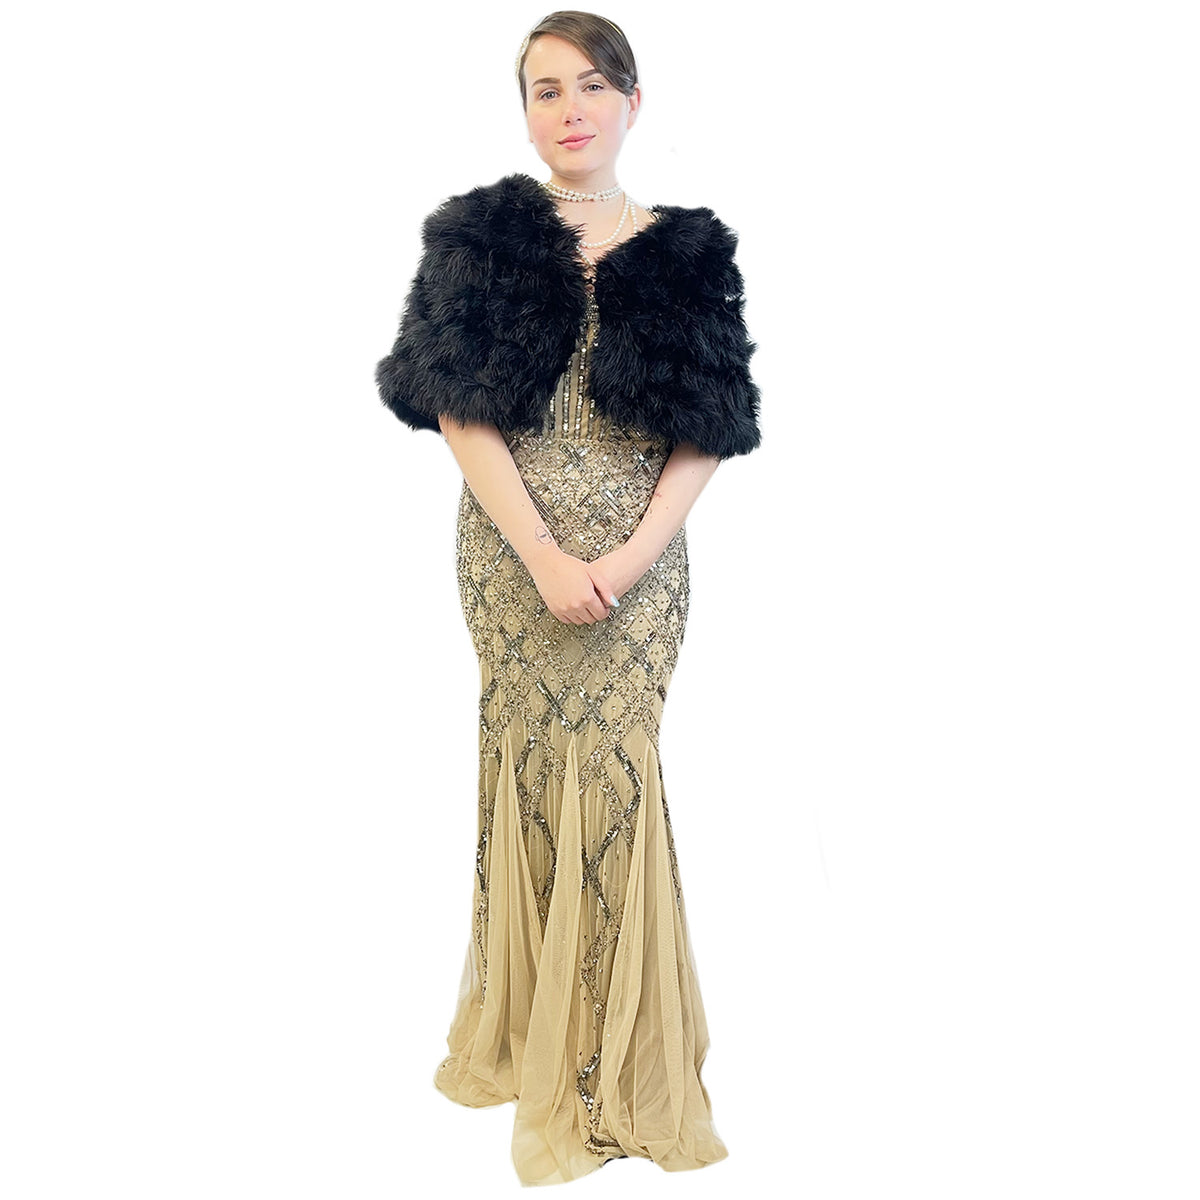 1920s Beige Beaded Evening Gown Women's Costume w/ Pearls and Headpiece